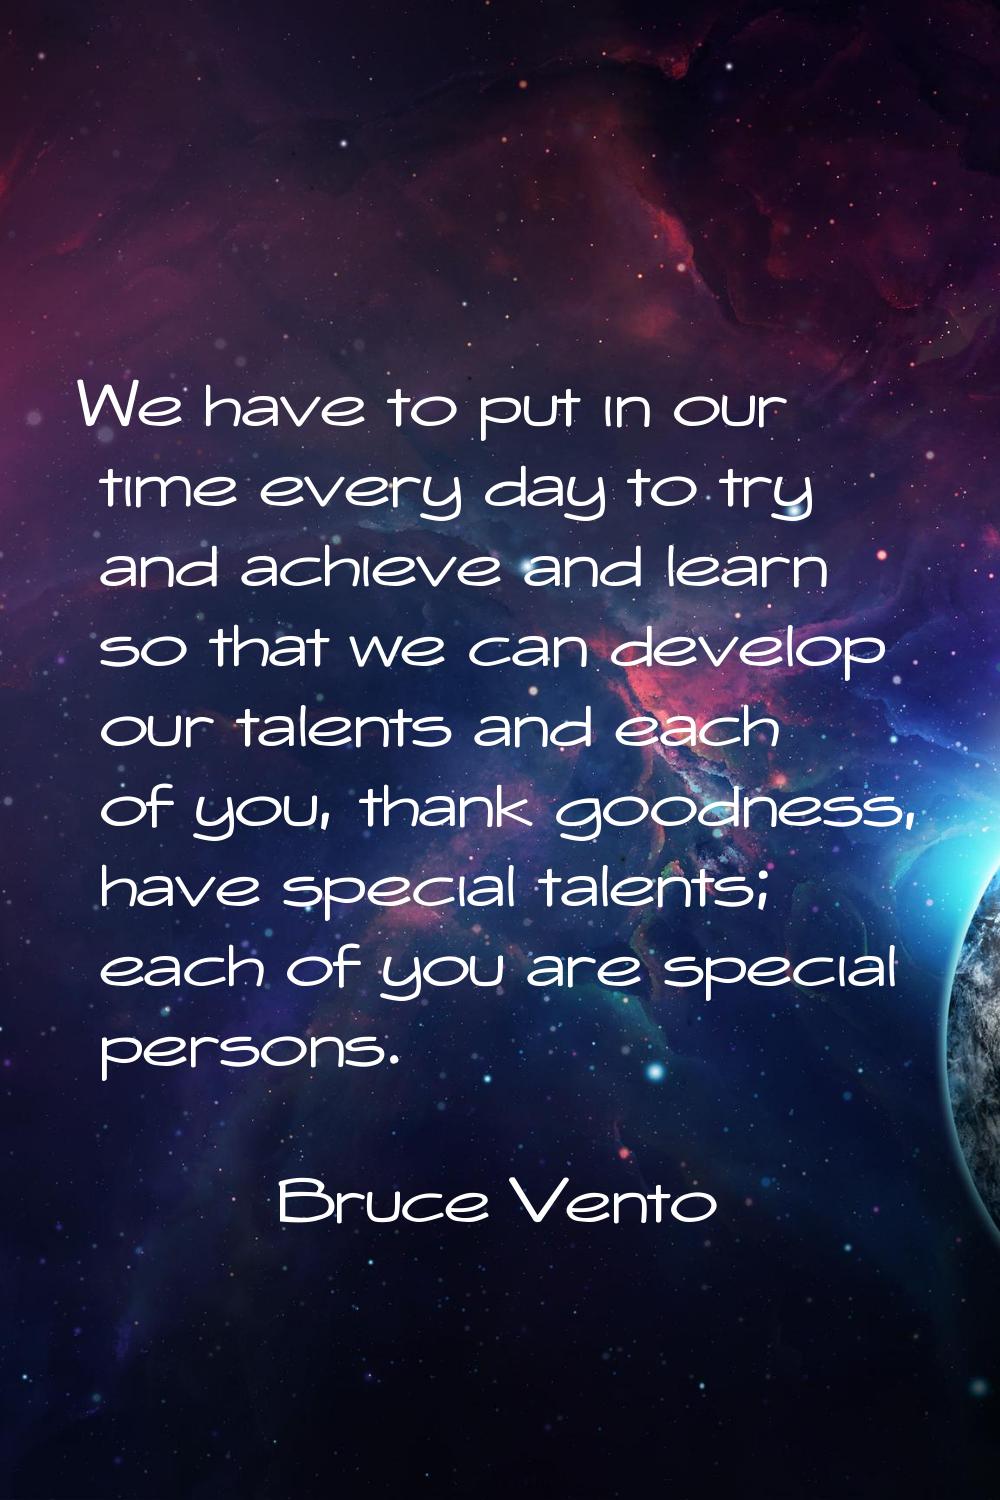 We have to put in our time every day to try and achieve and learn so that we can develop our talent